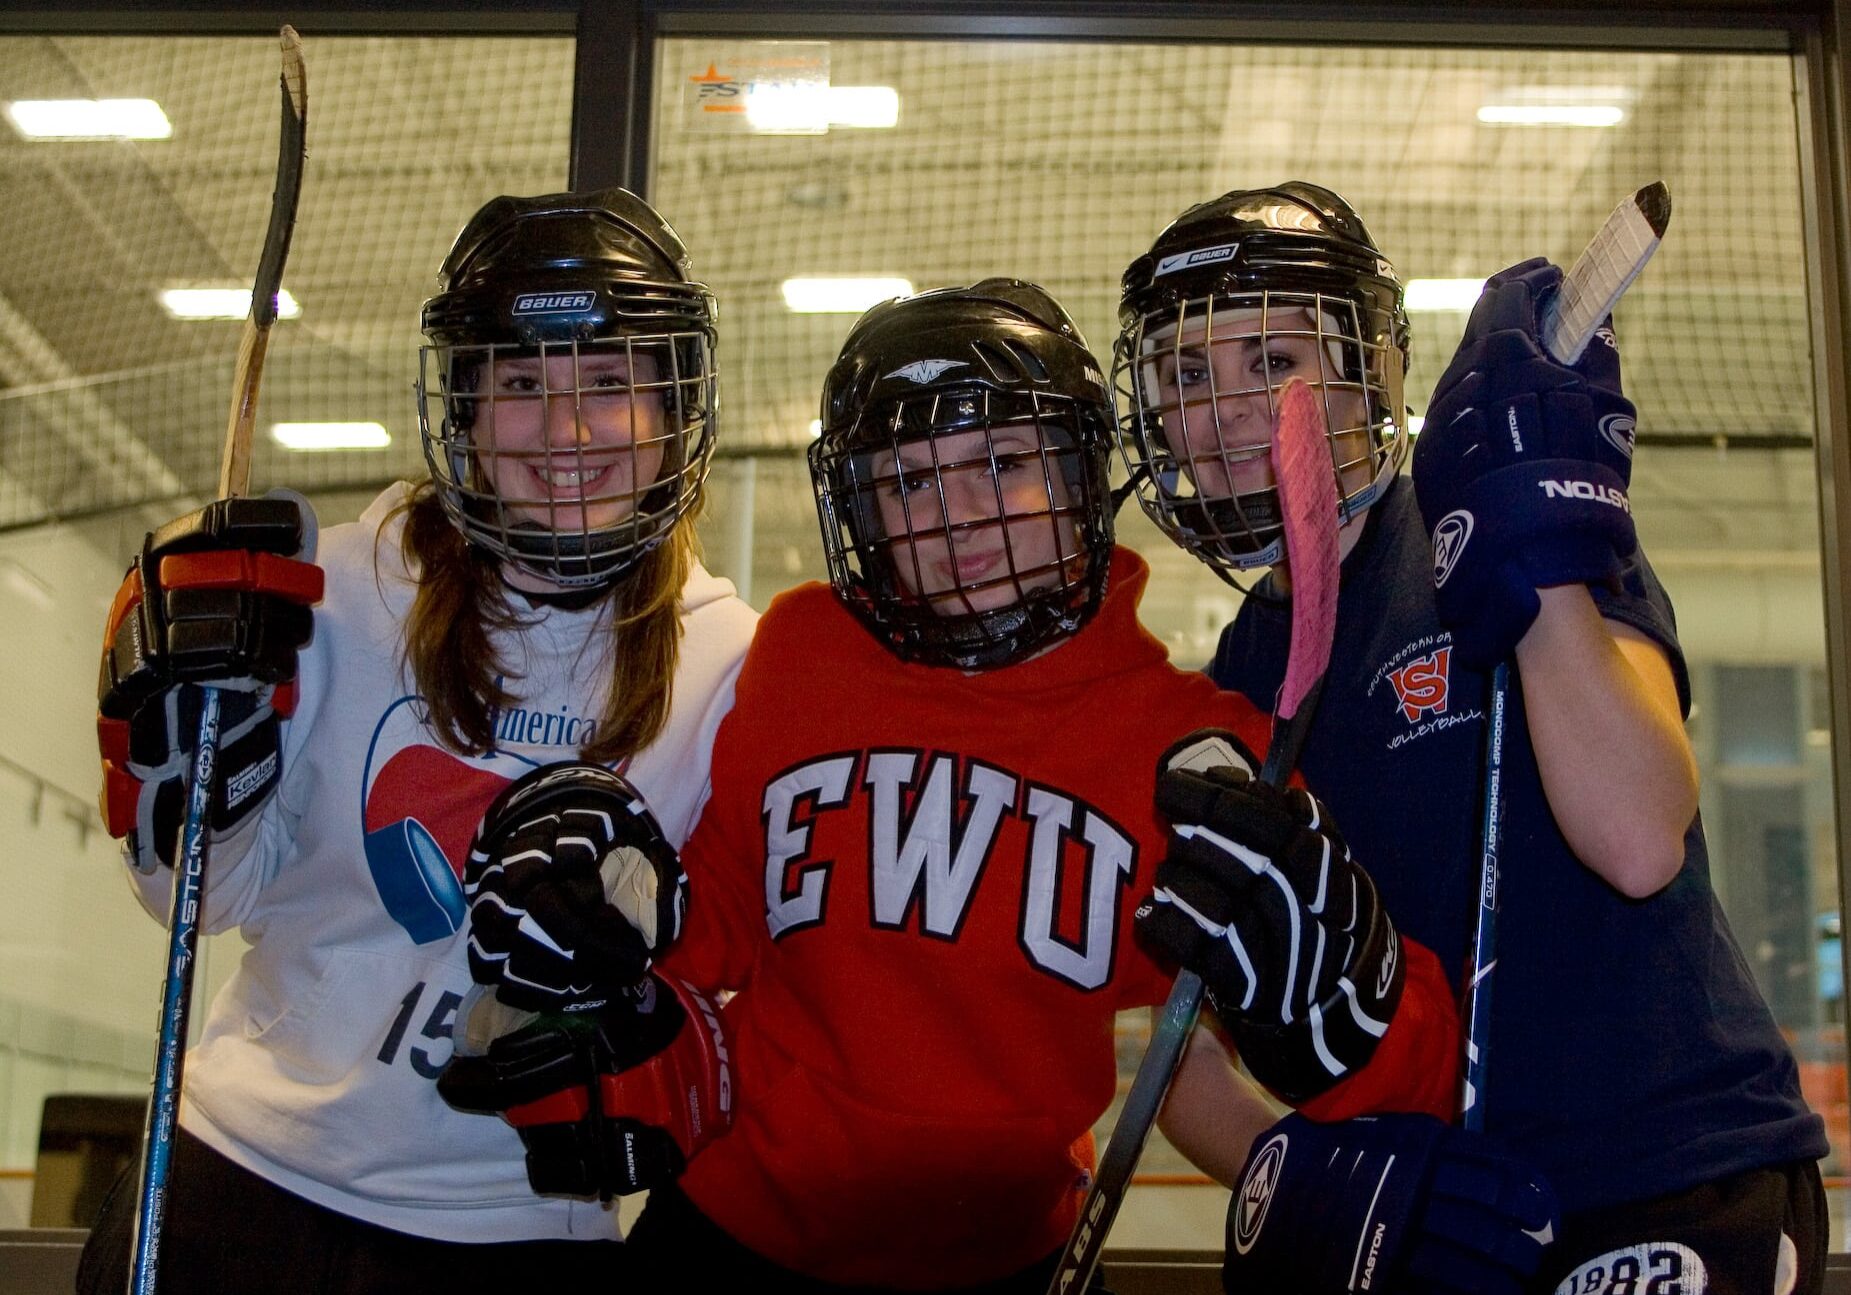 Baitlyn, Kayla, and Daitlin pose, wearing hockey gear, in front of the rec center's ice rink